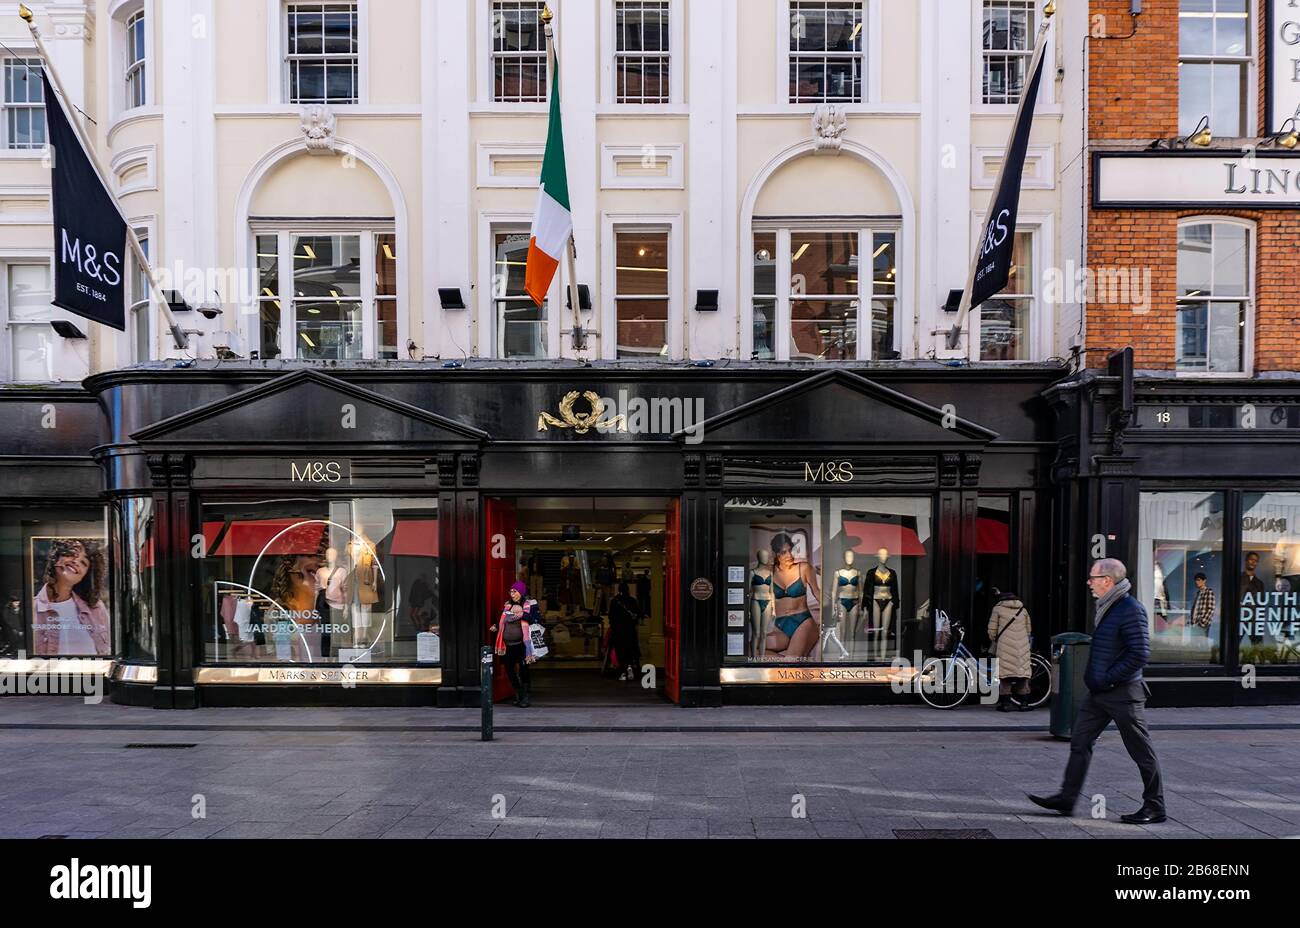 Store Dublin Ireland High Resolution Stock Photography and Images - Alamy